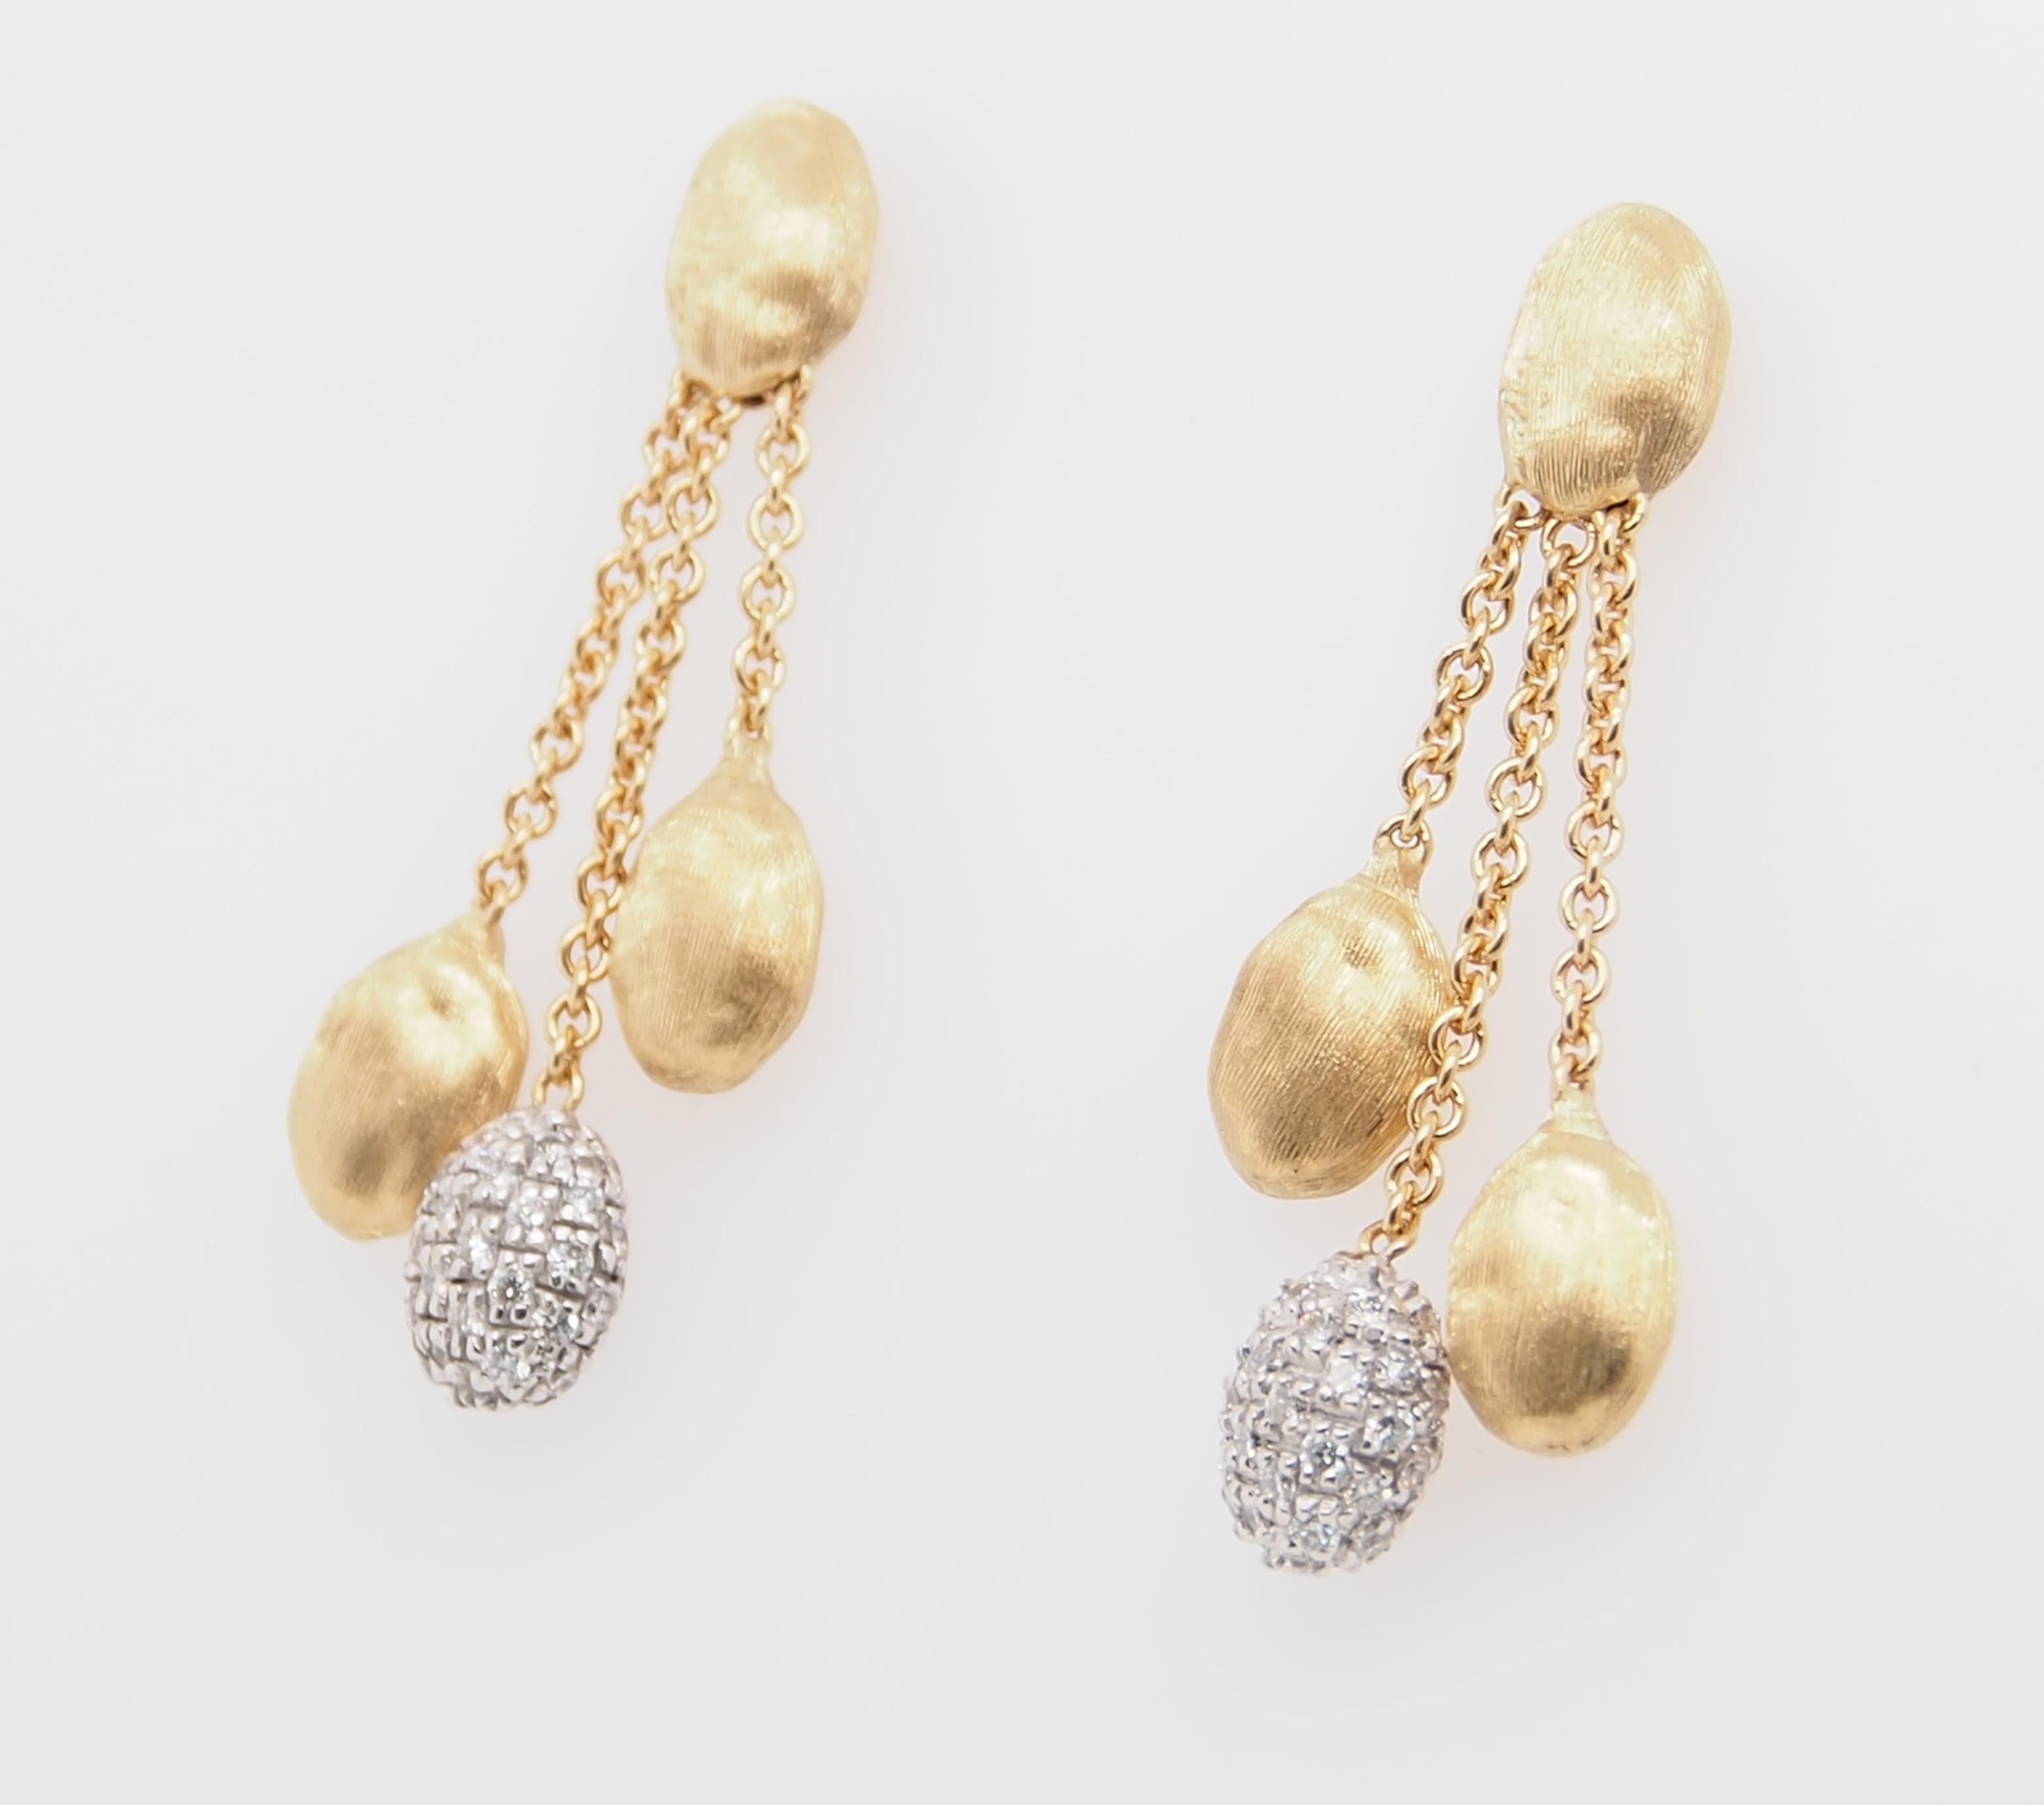 A classic from Marco Bicego Siviglia Collection 18K yellow gold Three Strand Earrings with a Diamond pave ball. (84) Round Brilliant Cut diamonds are pave set .63 carat total weight G-H in color VS in clarity. The earrings weigh 6.2 grams are 1 1/4